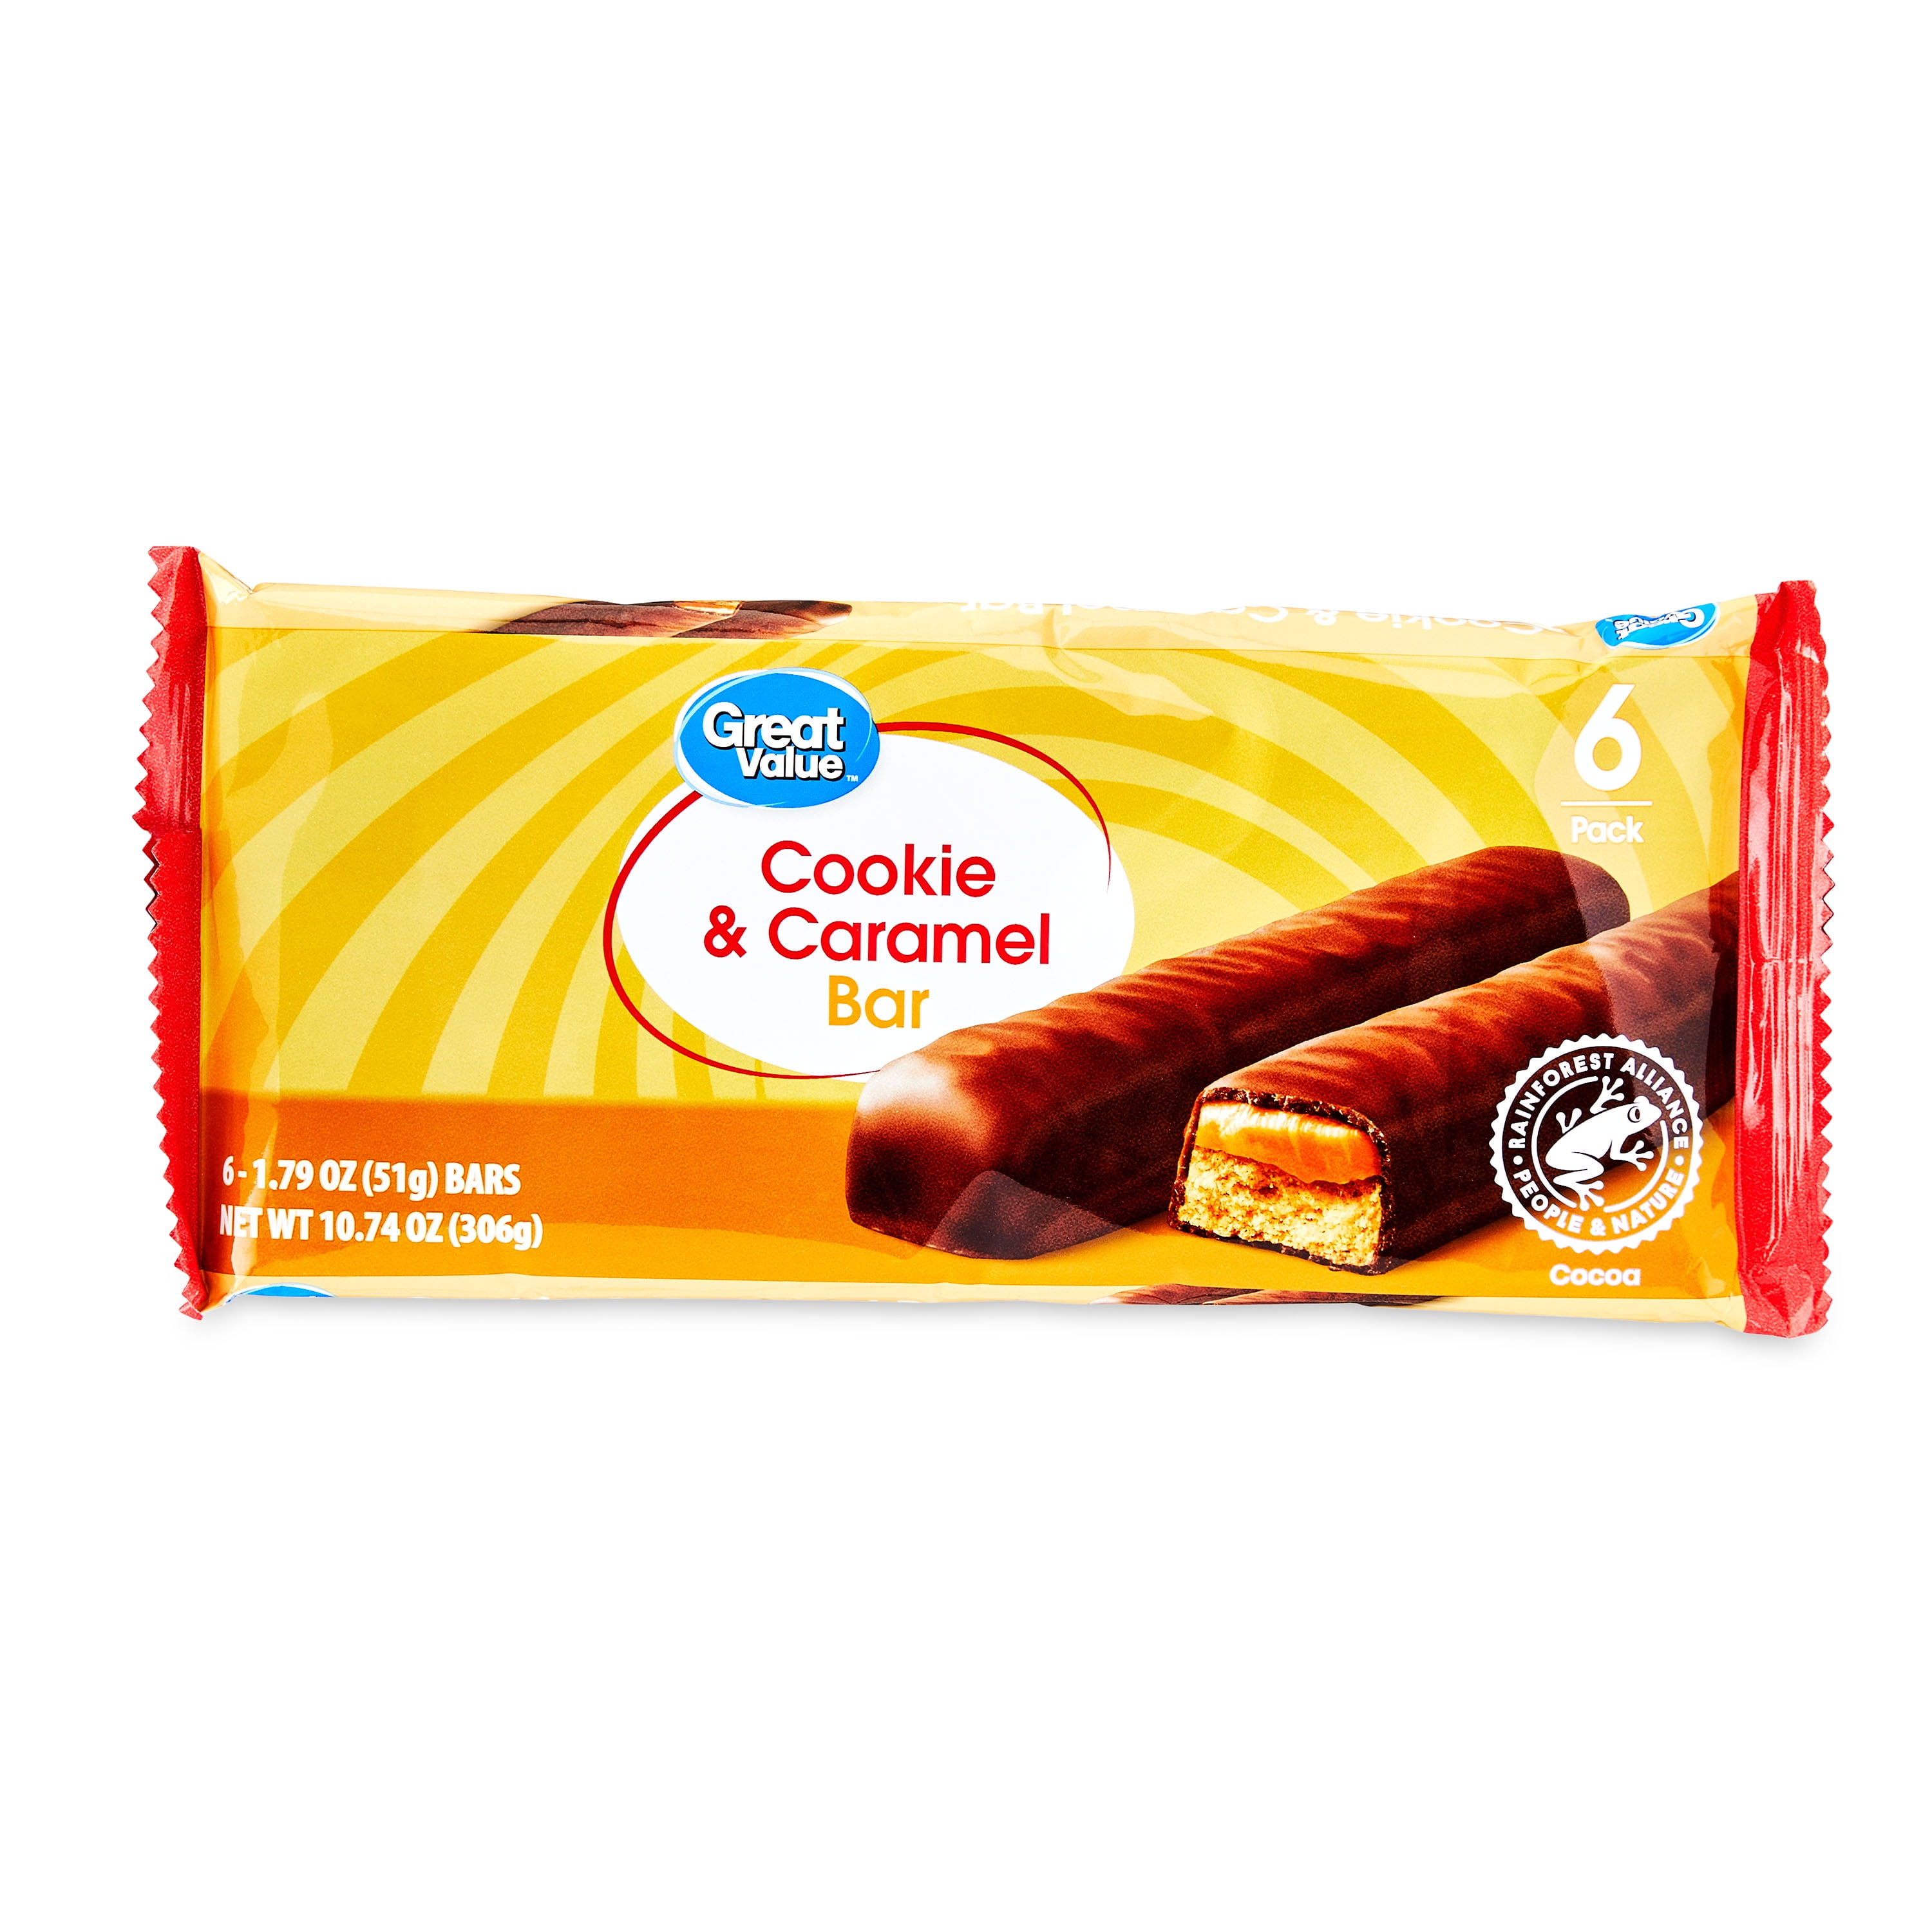 Great Value Cookie & Caramel Bar, 10.74 oz, 6 Count